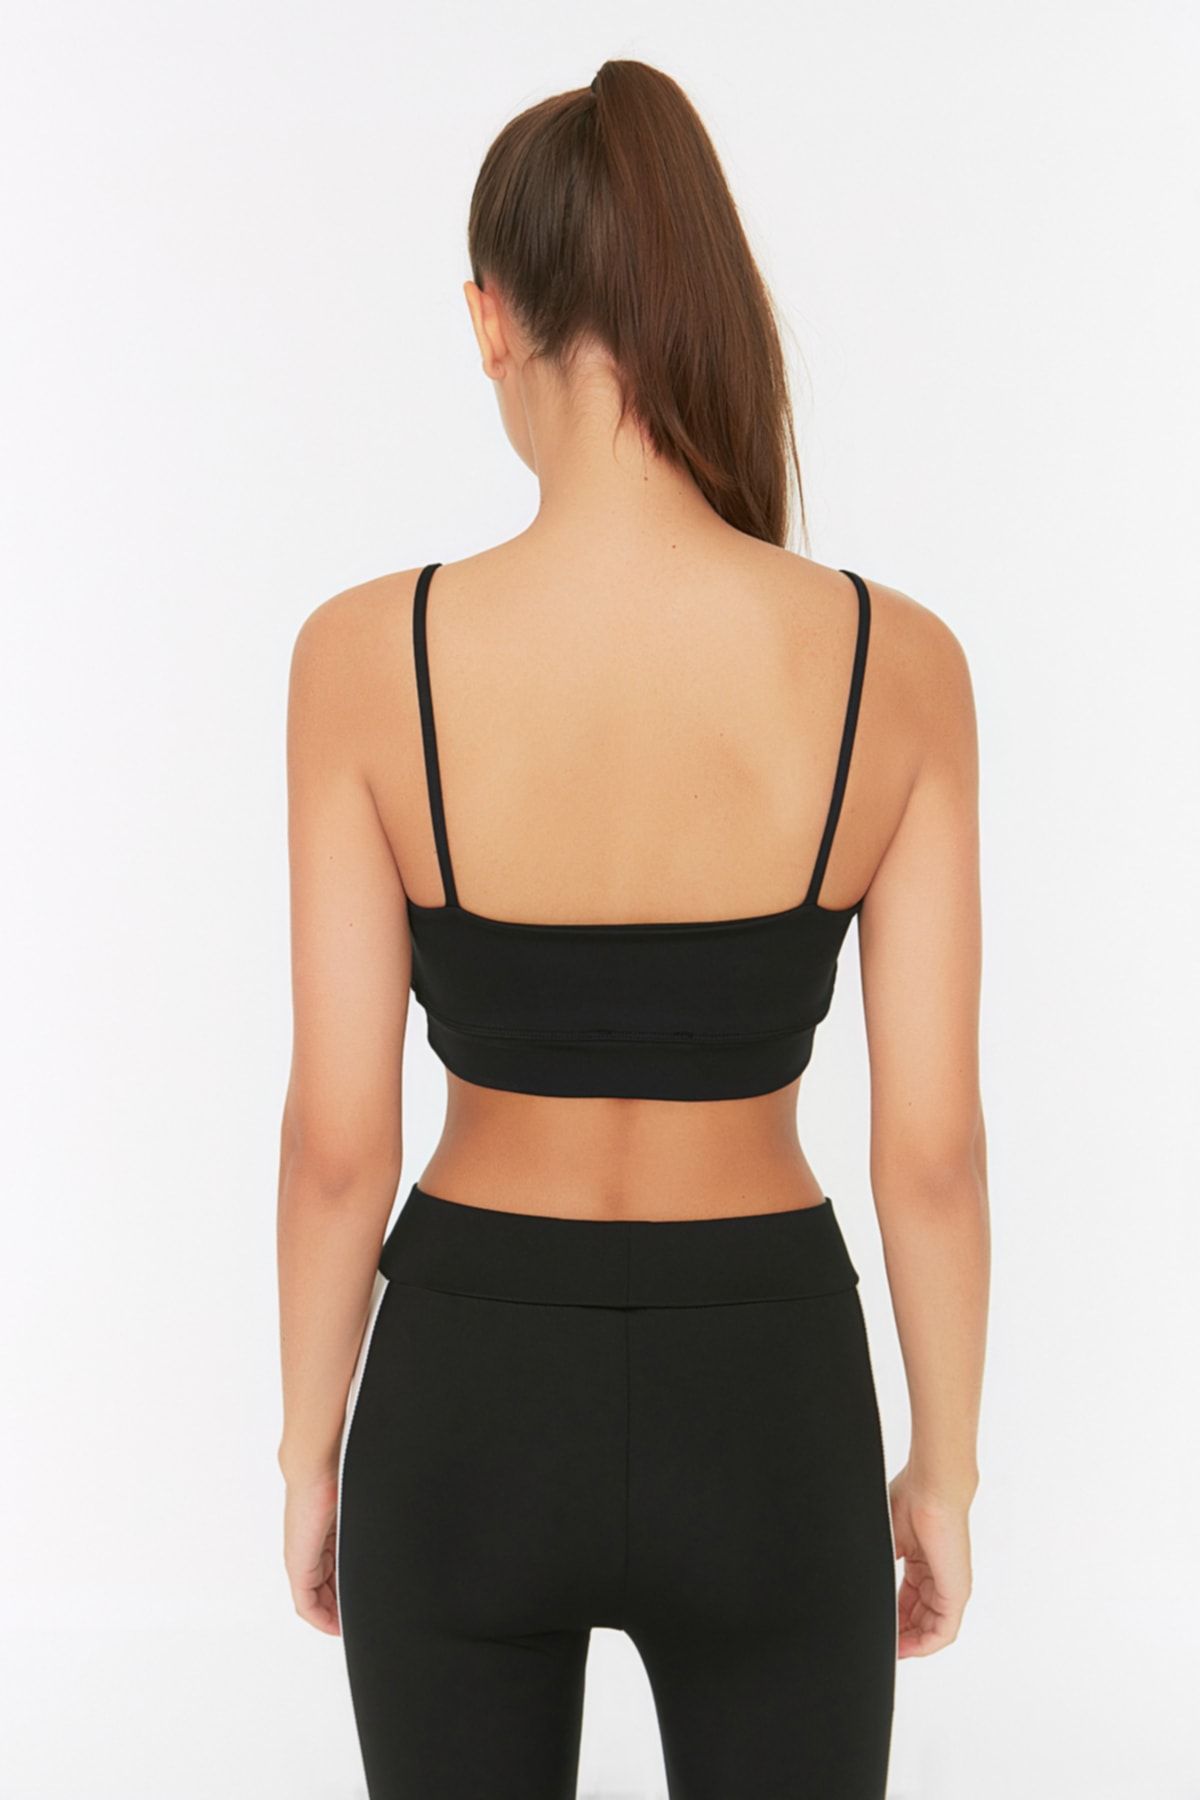 Trendyol Collection Black Seamless/Seamless Supported/Shaping